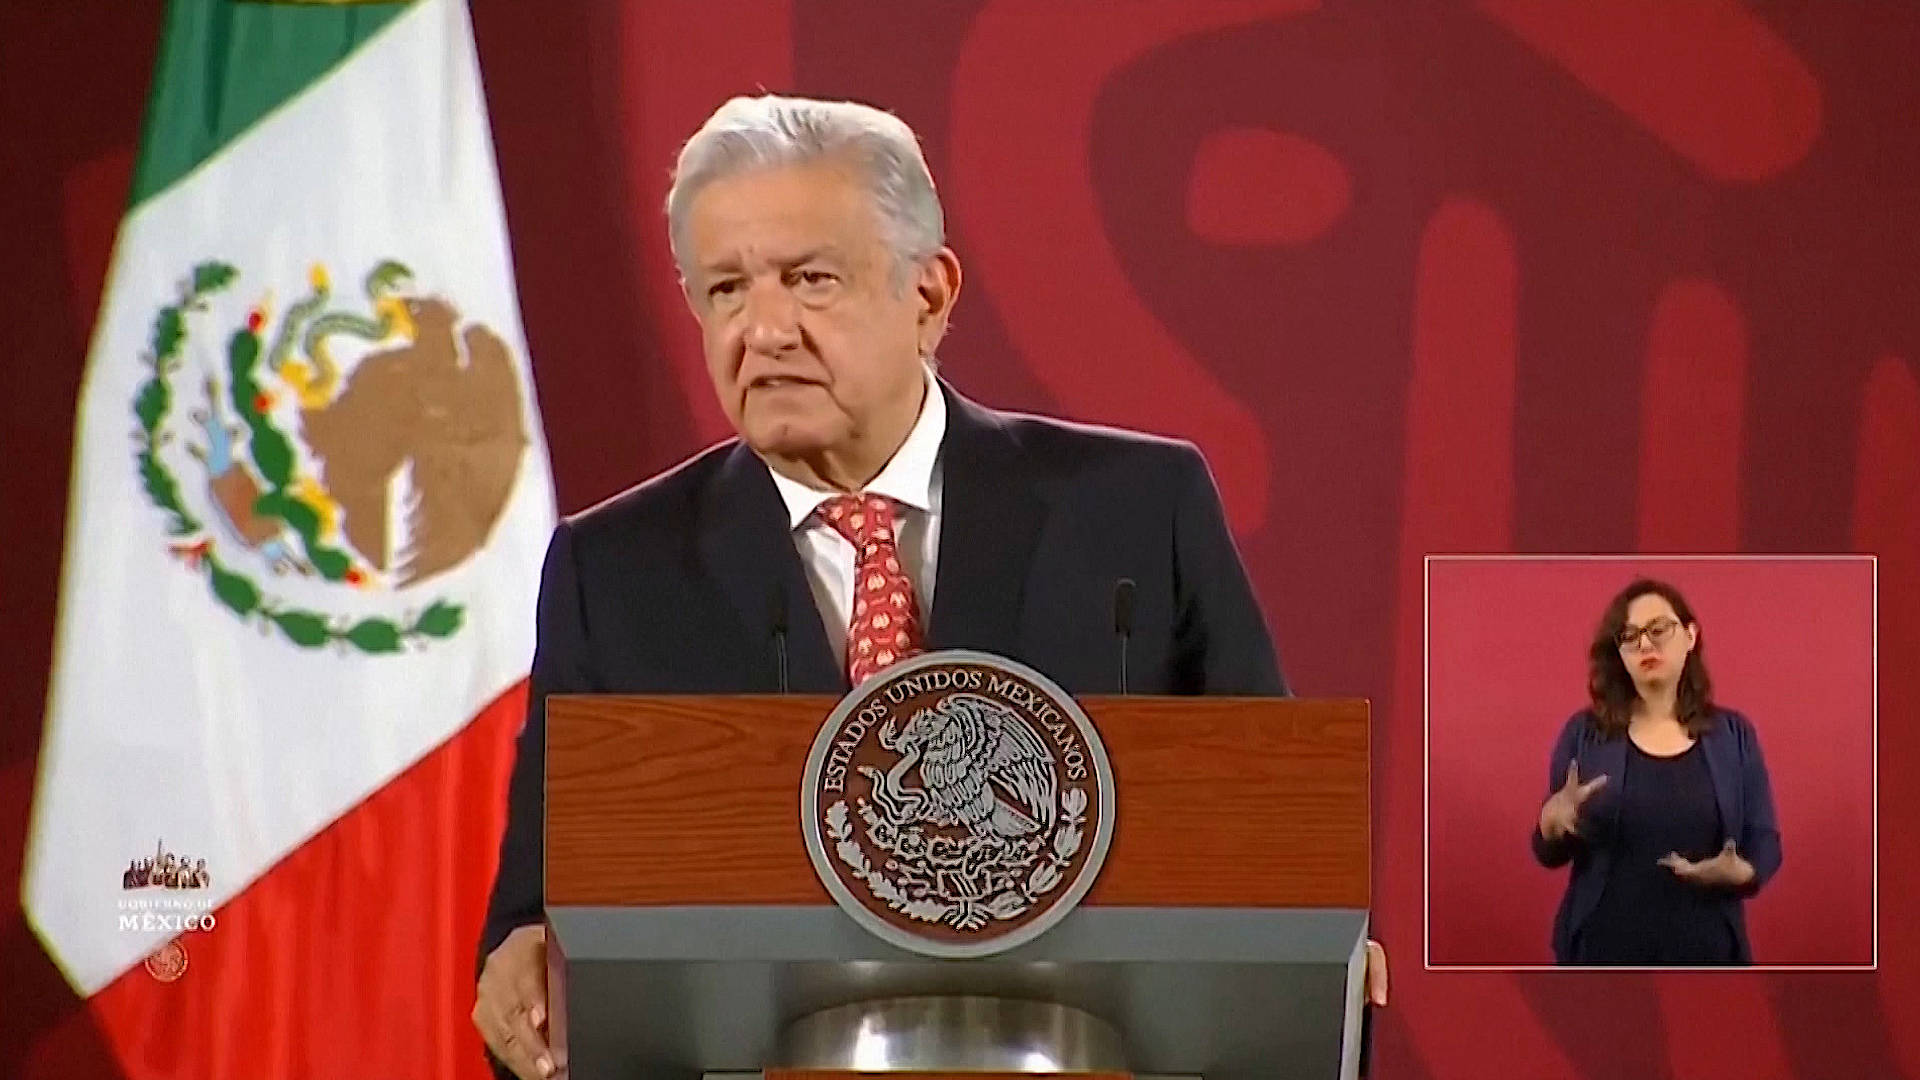 Mexico’s president decided not to participate in the Americas summit after Biden banned the presence of Cuba, Venezuela and Nicaragua